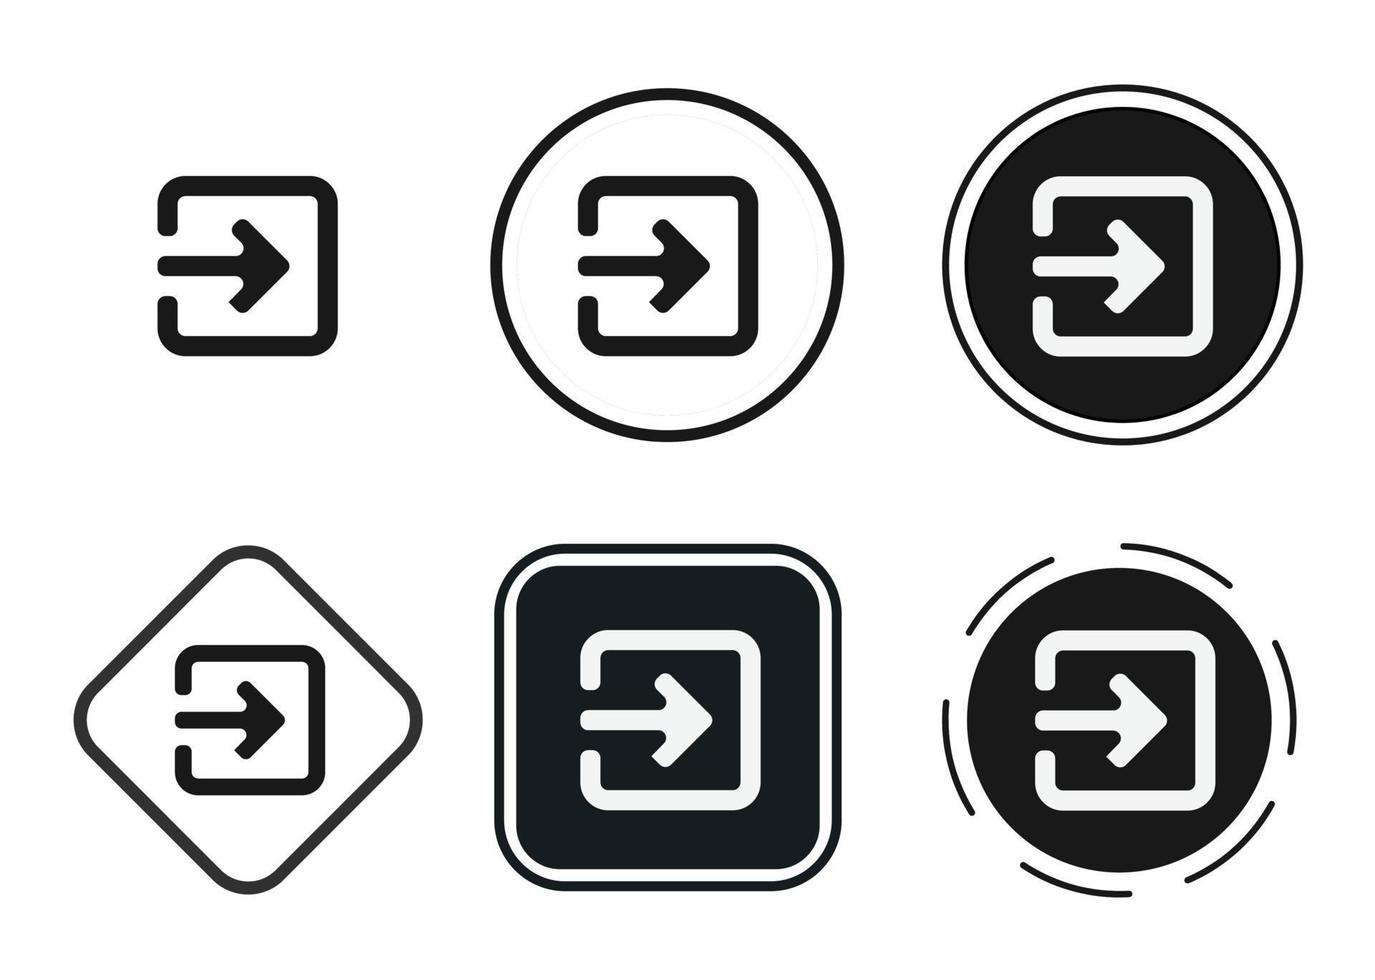 exit icon . web icon set . icons collection flat. Simple vector illustration.